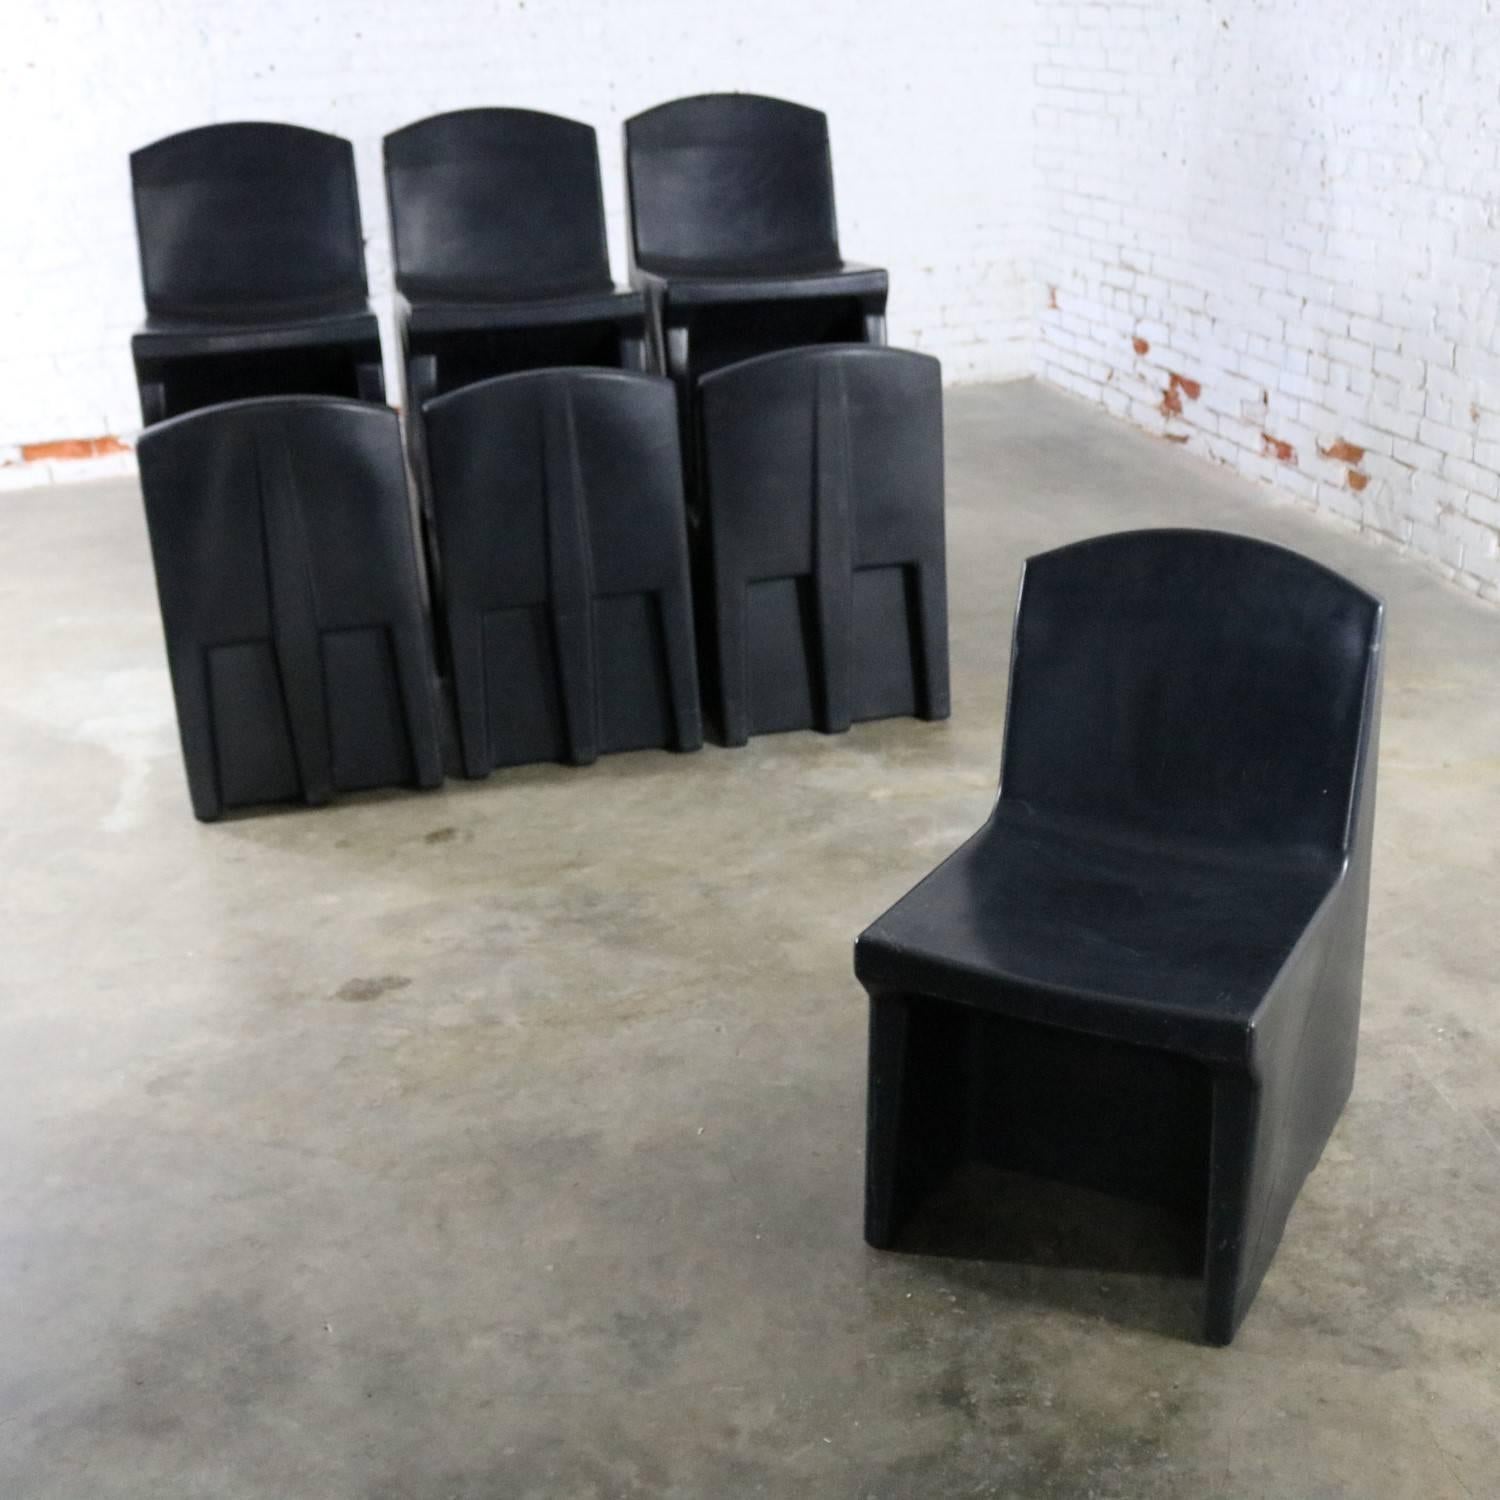 Fun and useful set of ten black molded polyethylene plastic side or slipper chairs by Norix from the Toughcare series. In fabulous condition and ready to use, circa 21st century.

These chairs aren’t designed by some famous designer or made by a